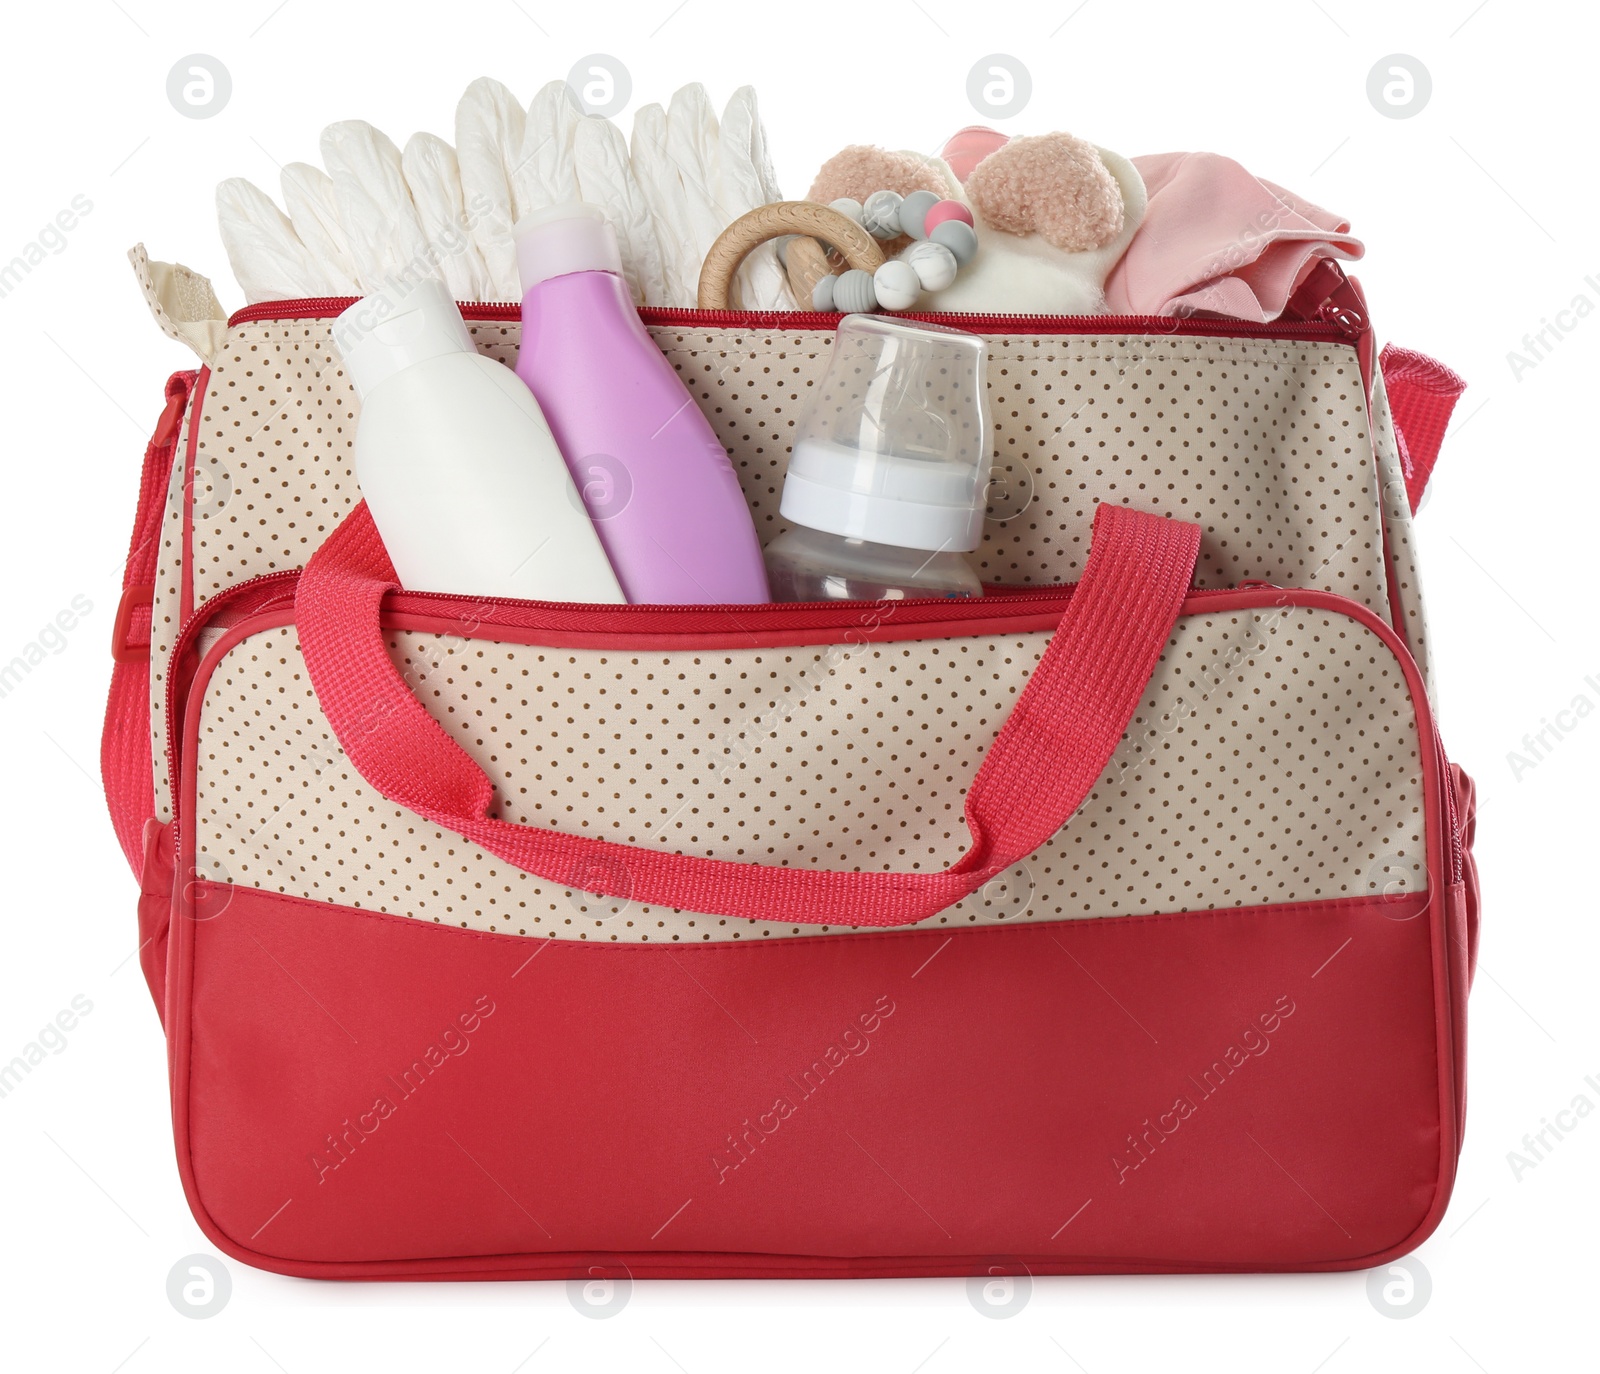 Photo of Mother's bag with baby's stuff isolated on white